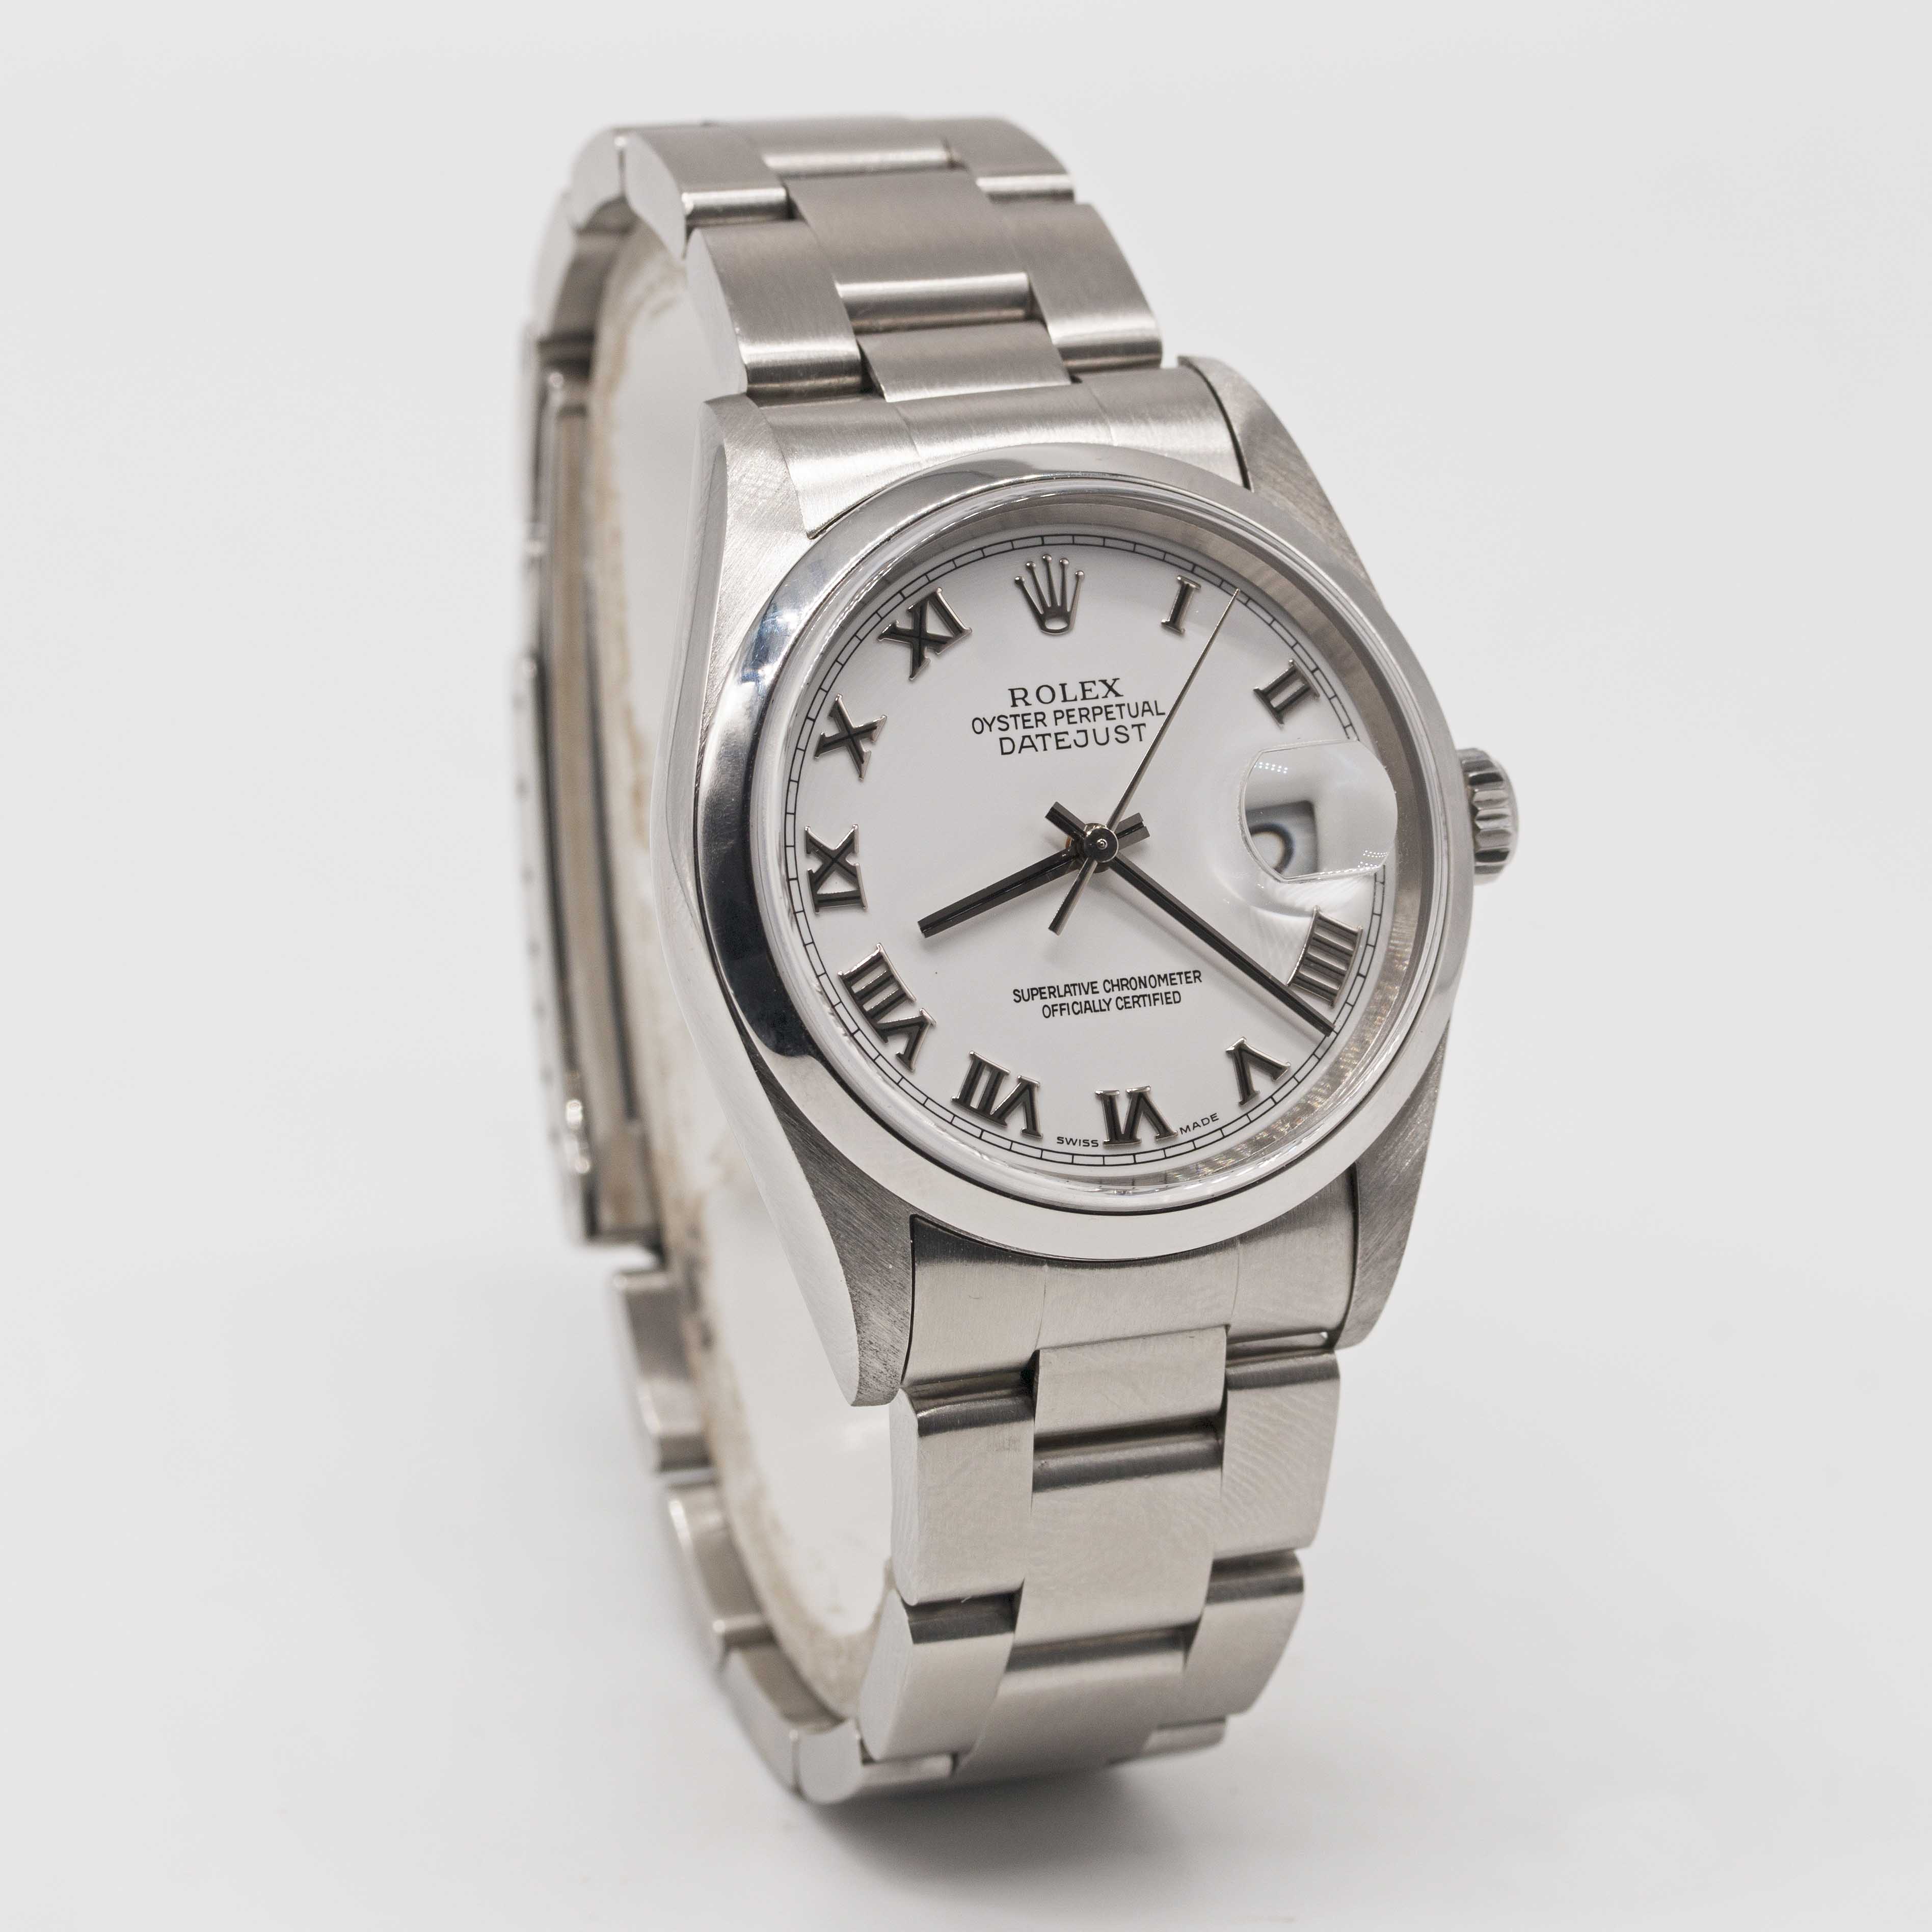 A GENTLEMAN'S STAINLESS STEEL ROLEX OYSTER PERPETUAL DATEJUST BRACELET WATCH CIRCA 2005, REF. - Image 4 of 7